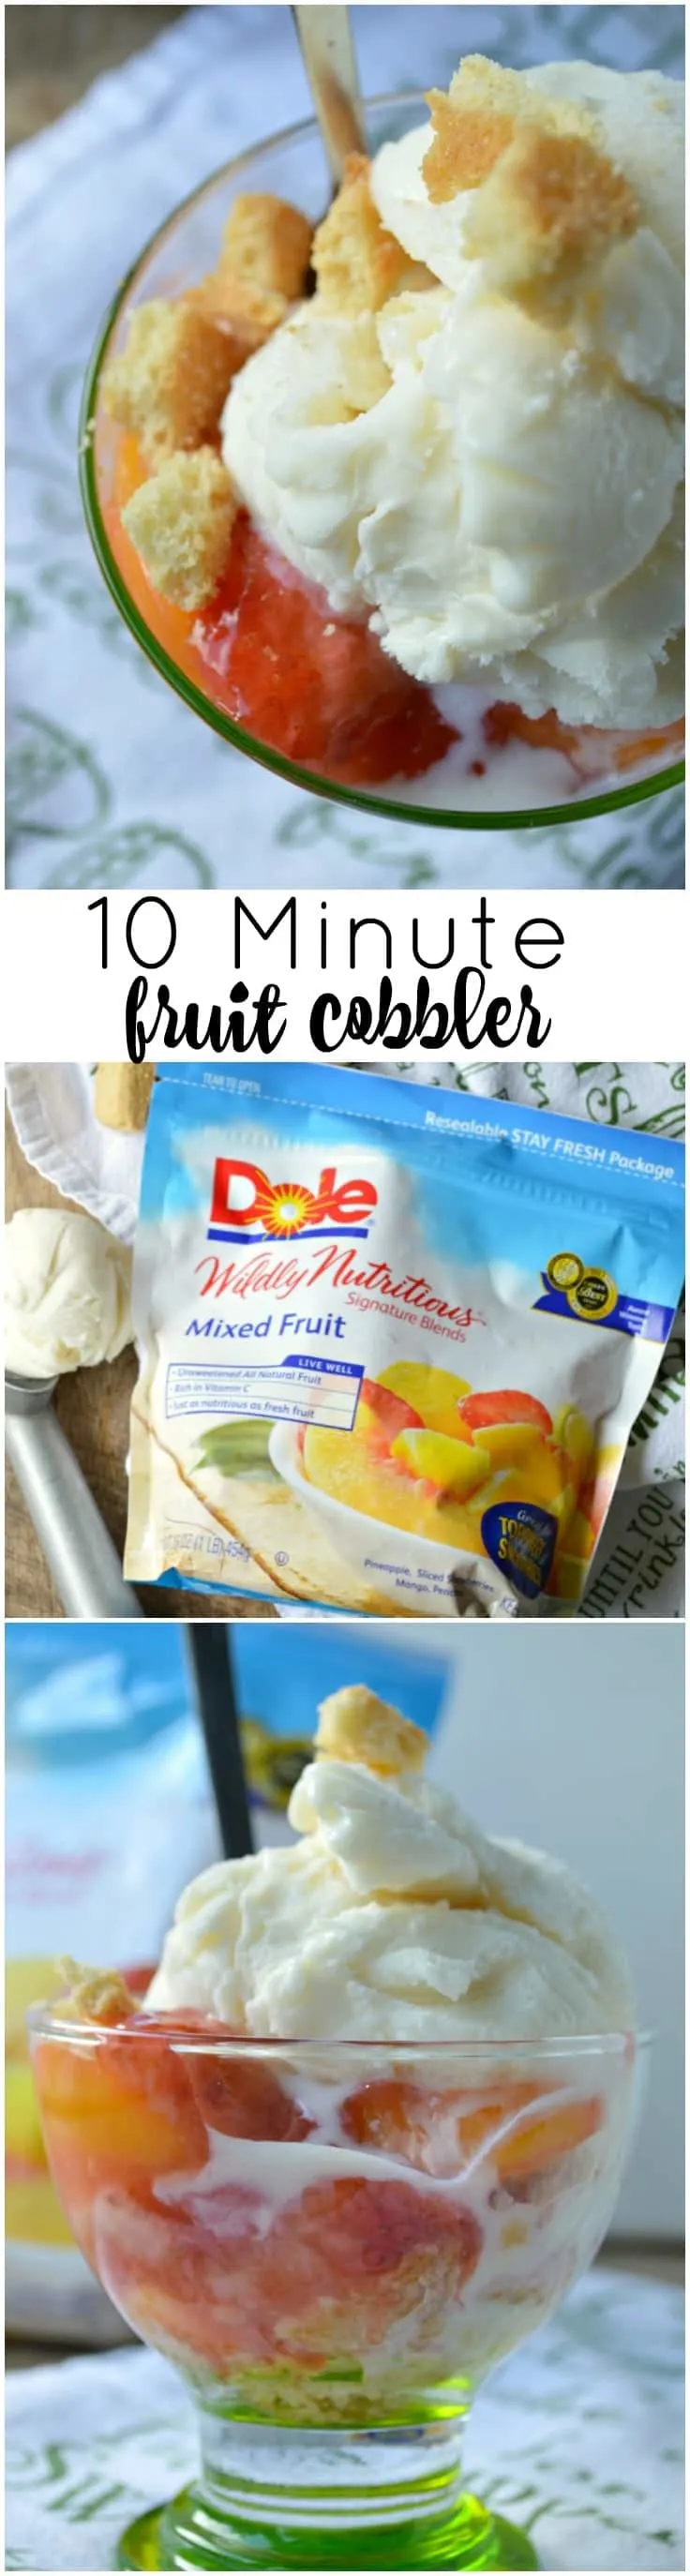 A quick, no-bake cobbler that is perfect for last minute get-togethers or extra guests! This 10 Minute Fruit Cobbler is a hassle free, simple solution to your sweet tooth!